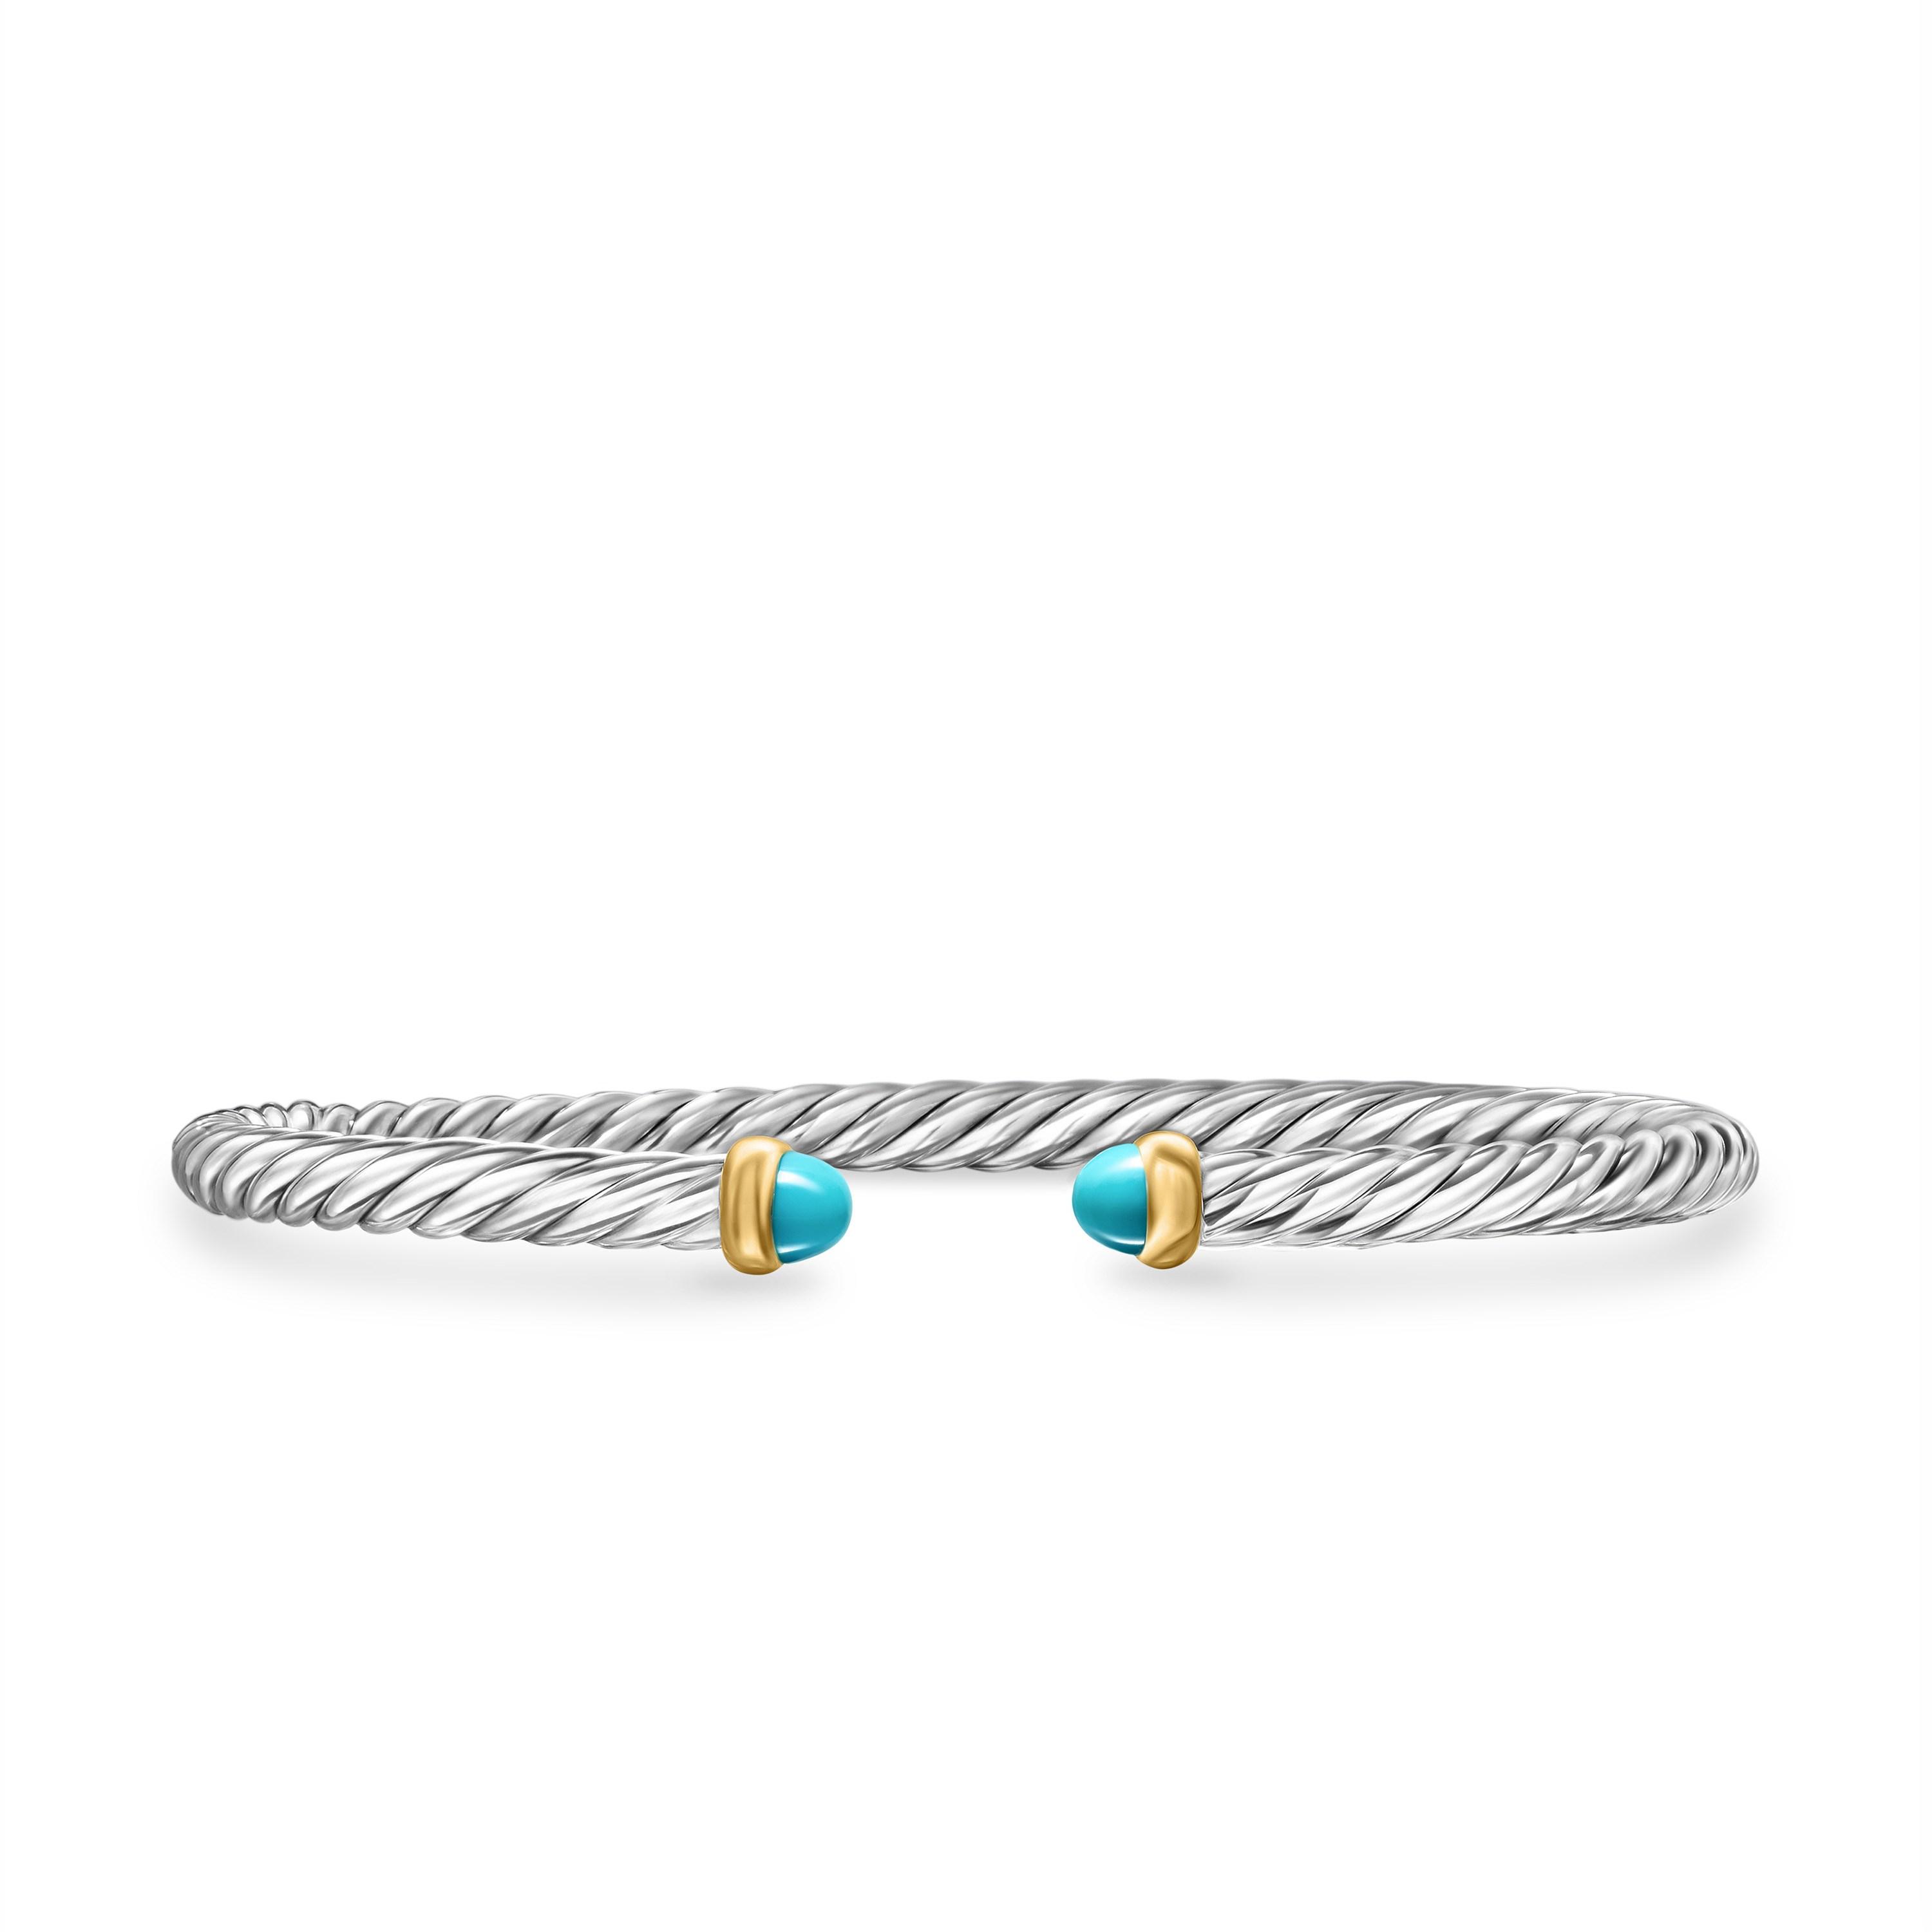 David Yurman Cable Flex Sterling Silver Bracelet with Turquoise, Size Small 0